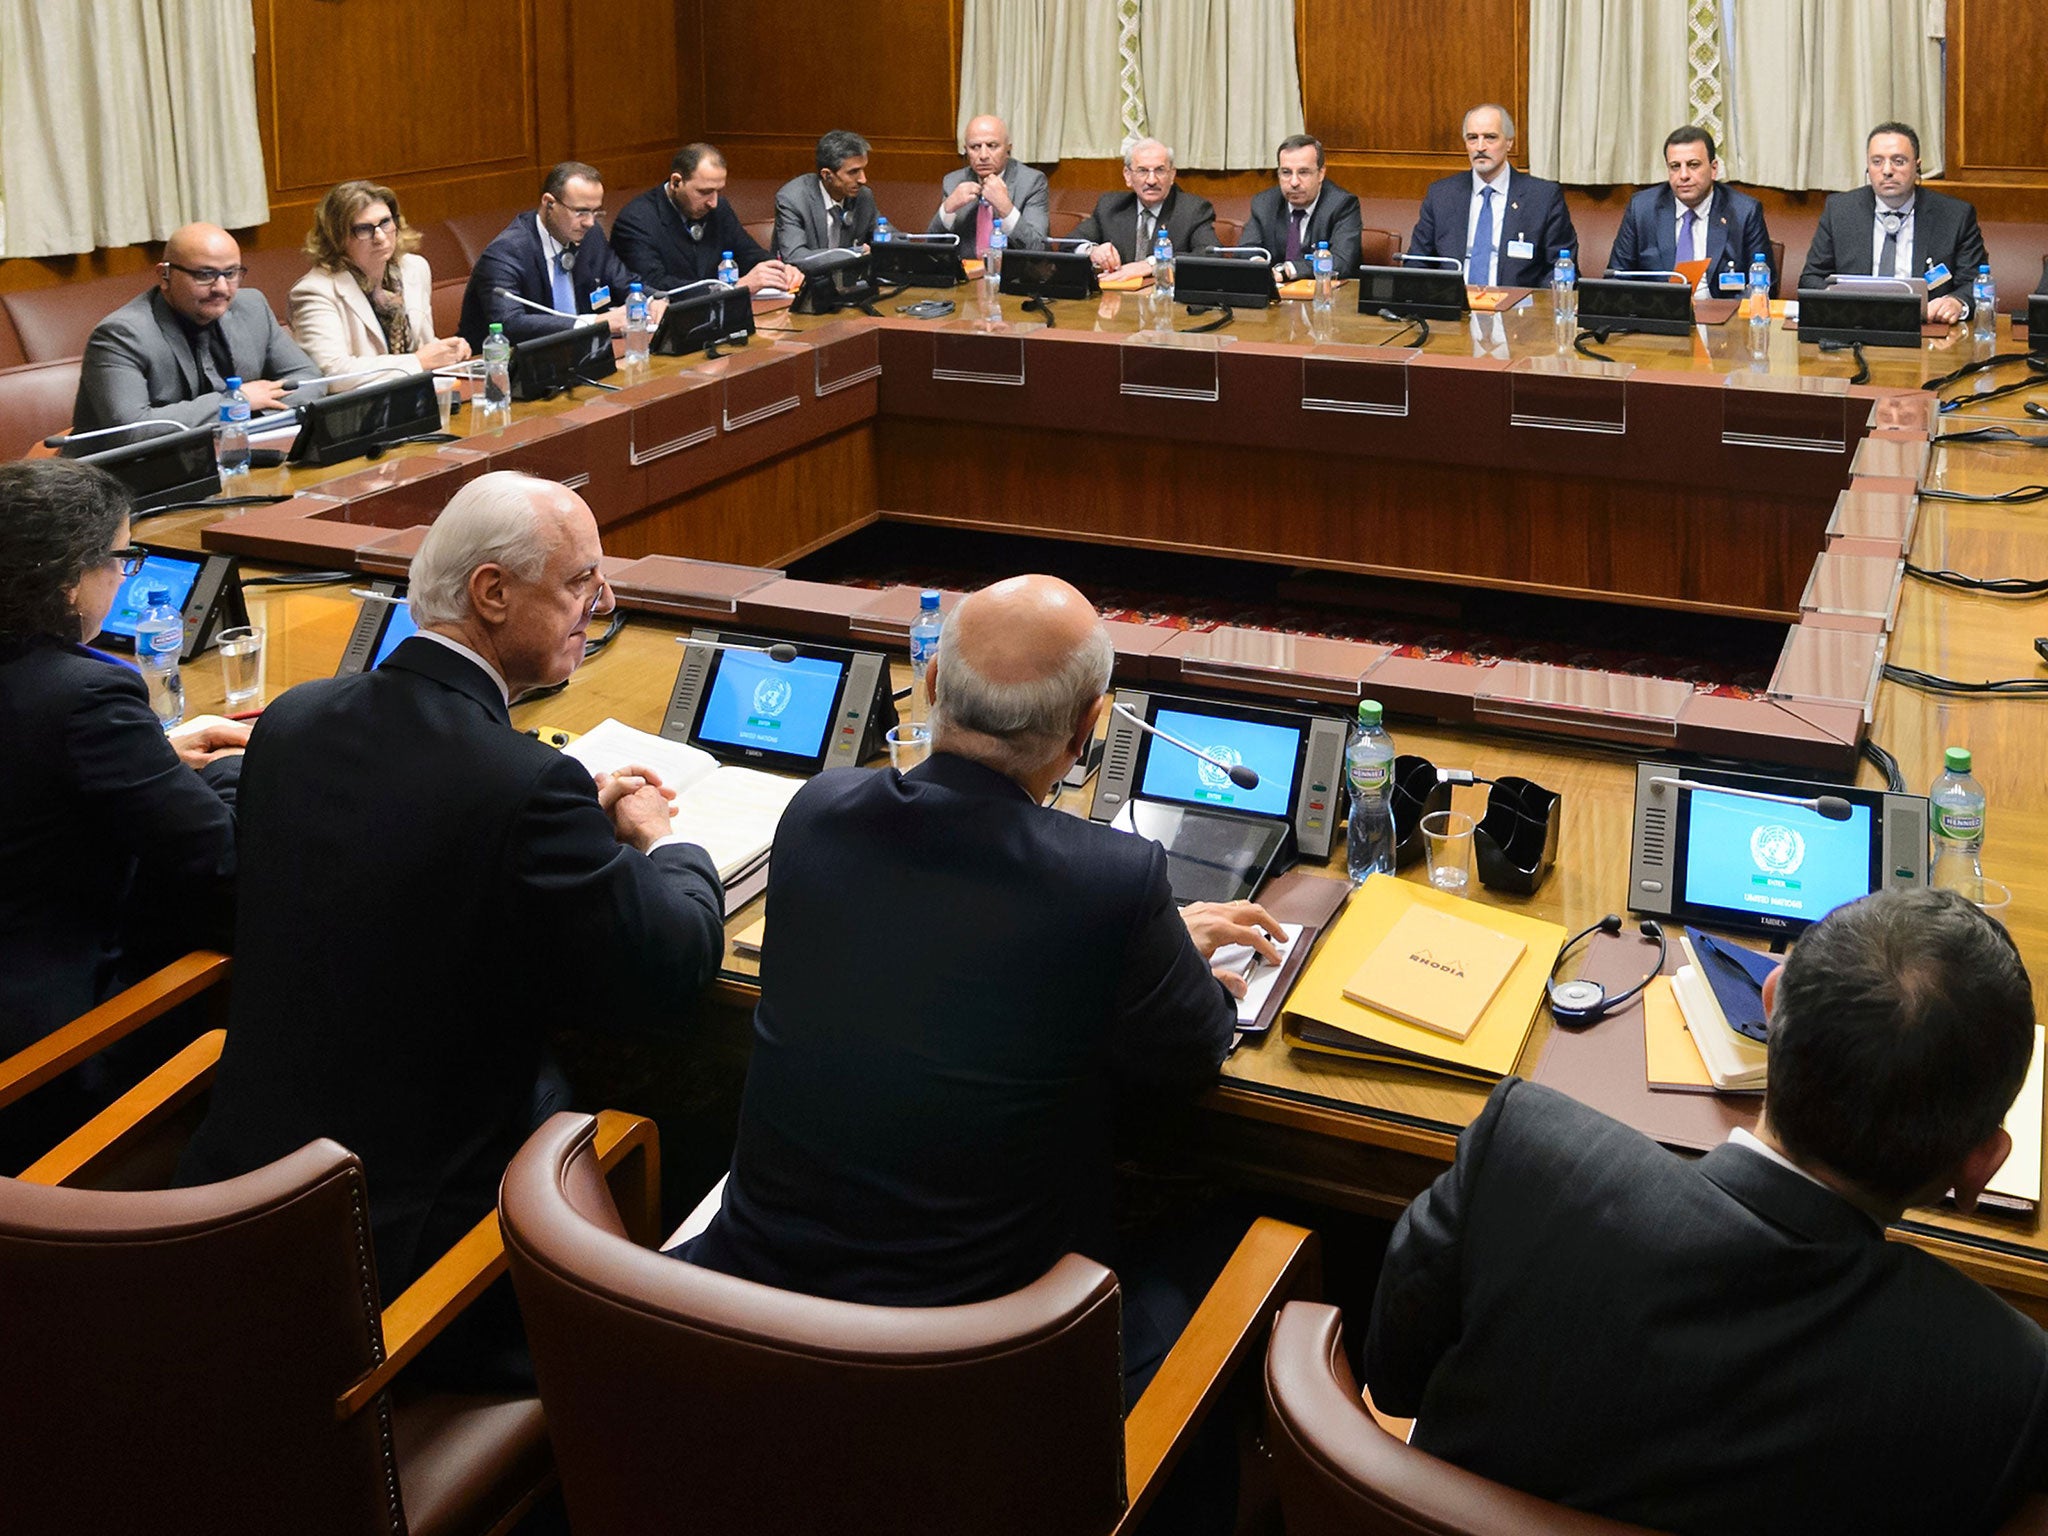 Staffan de Mistura (2nd L Below) faces Syrian ambassador to the UN and head of the government delegation Bashar al-Jaafari (4th R Above) at the opening of Syrian peace talks with the Syrian government delegation at the United Nations (UN) Offices in Geneva on January 29, 2016. FABRICE COFFRINI/AFP/Getty Images